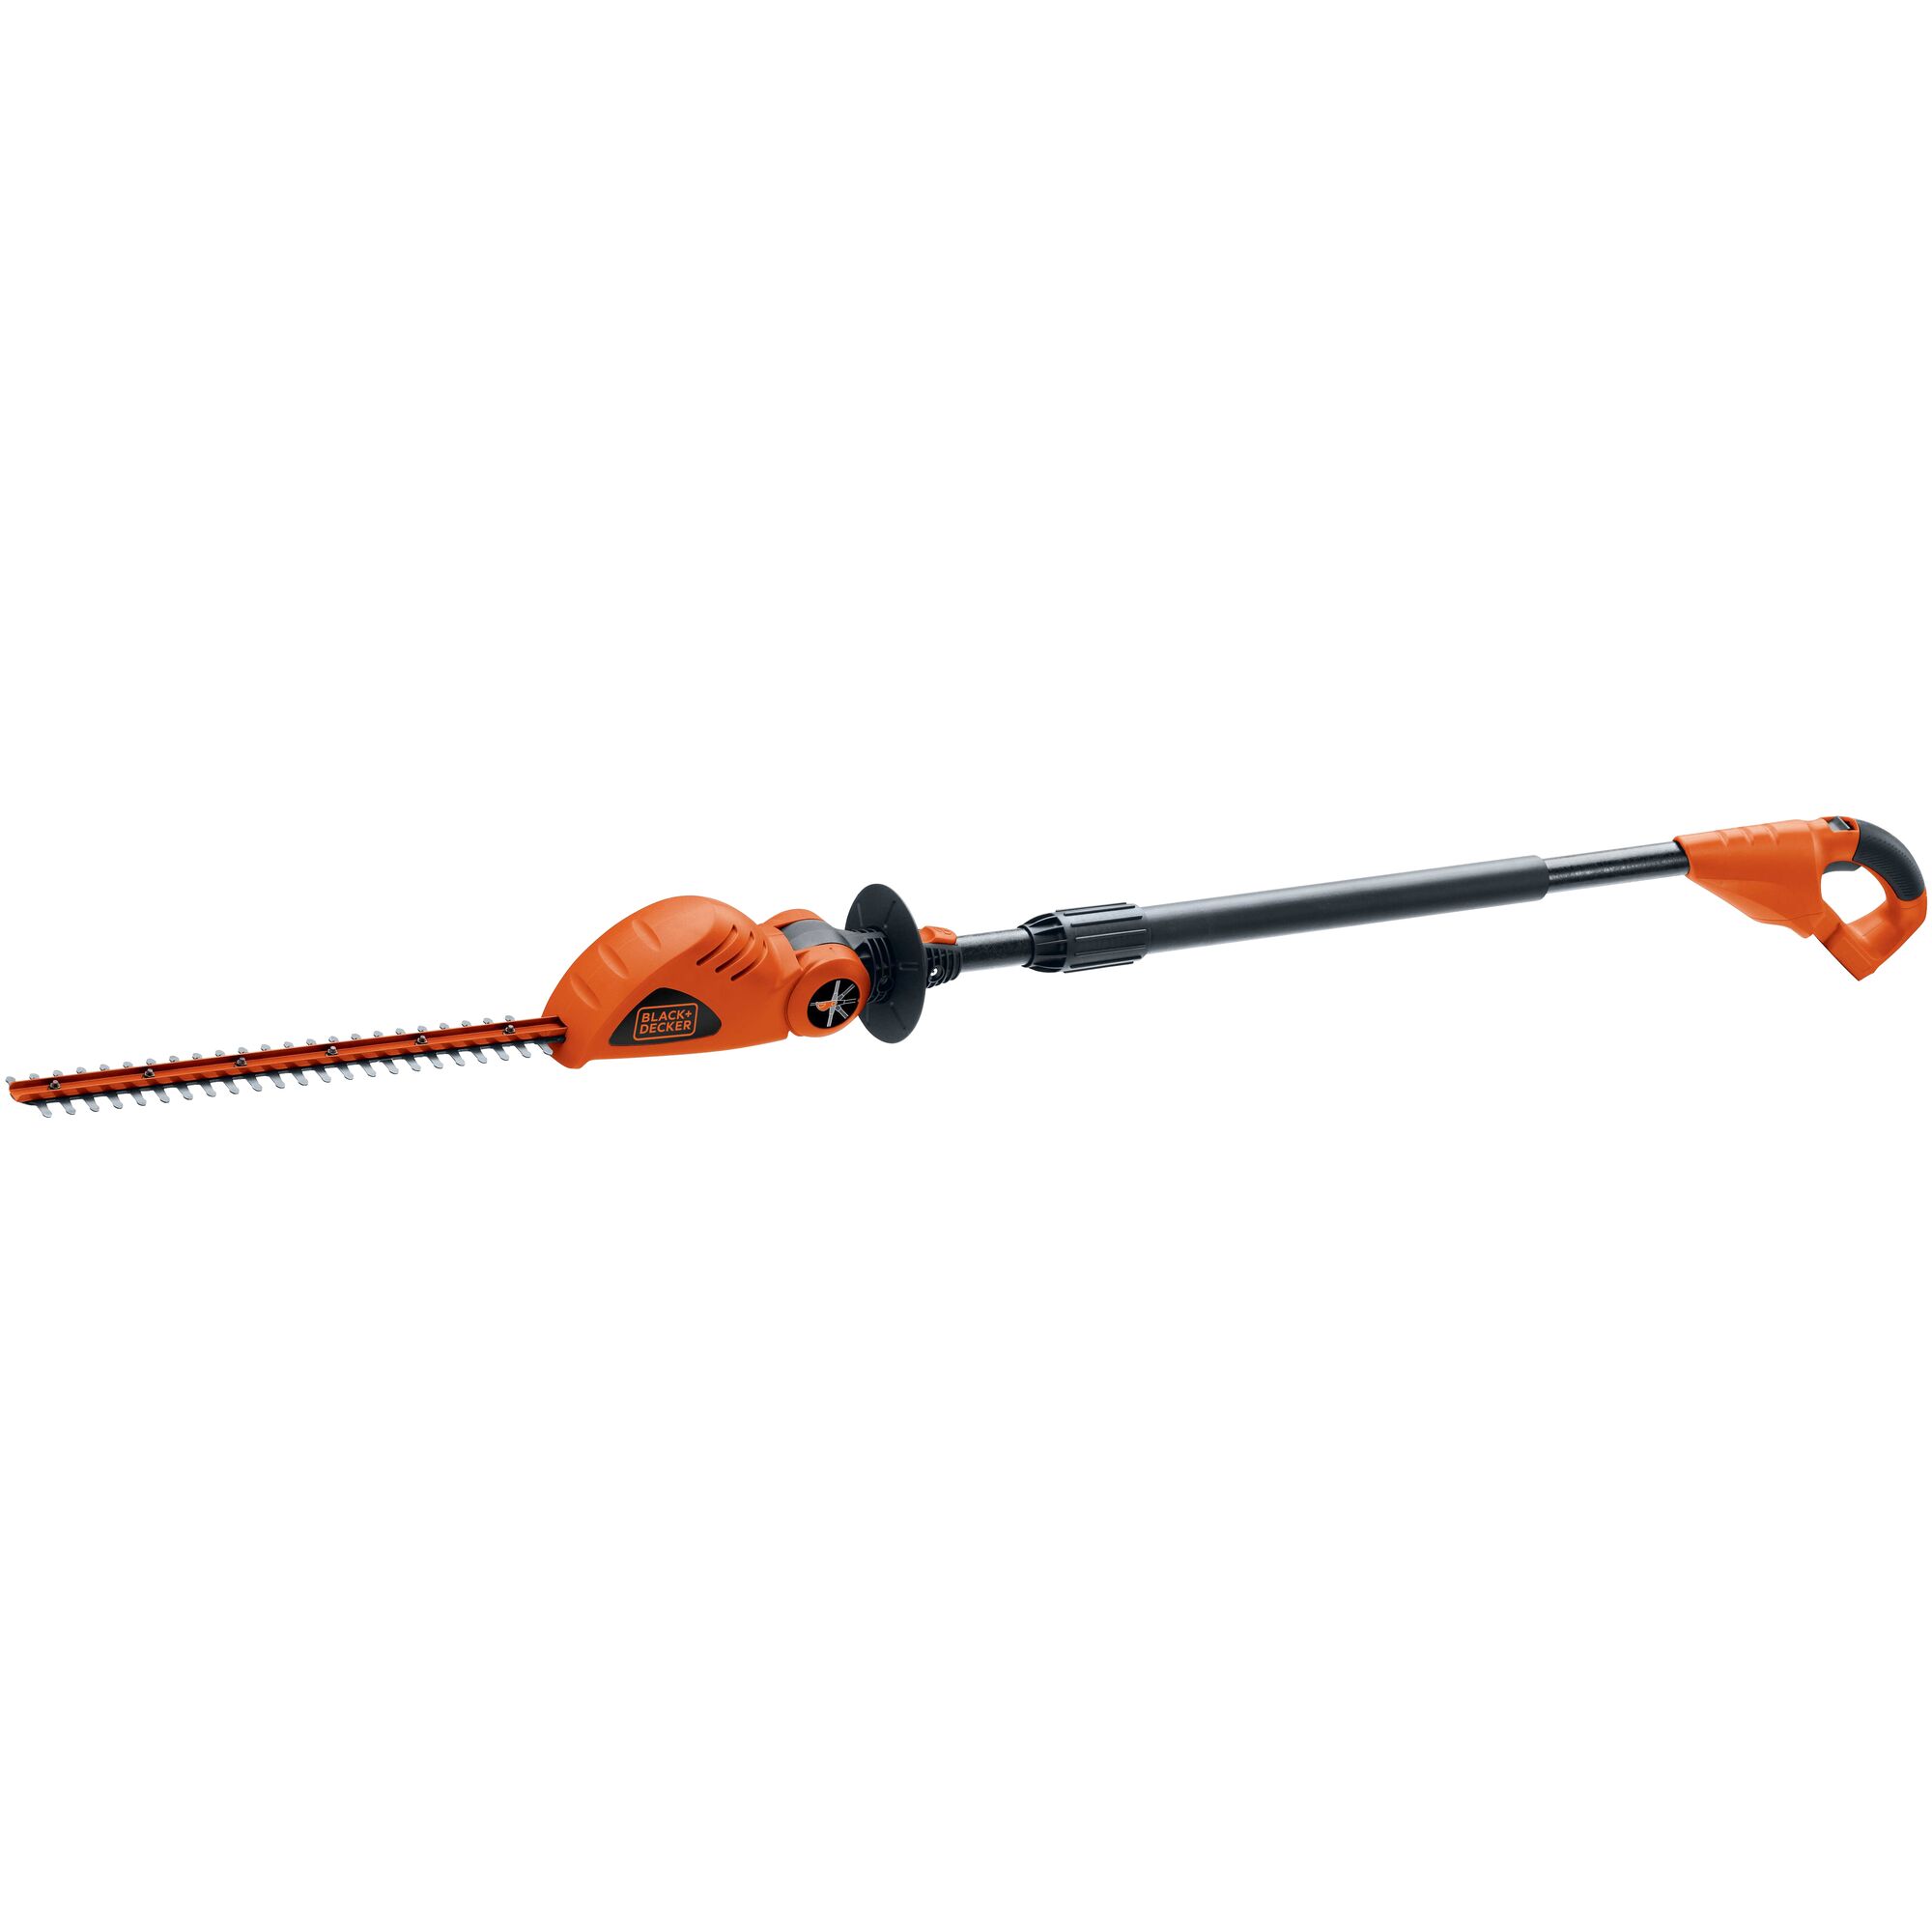 Lithium Pole Hedge Trimmer.